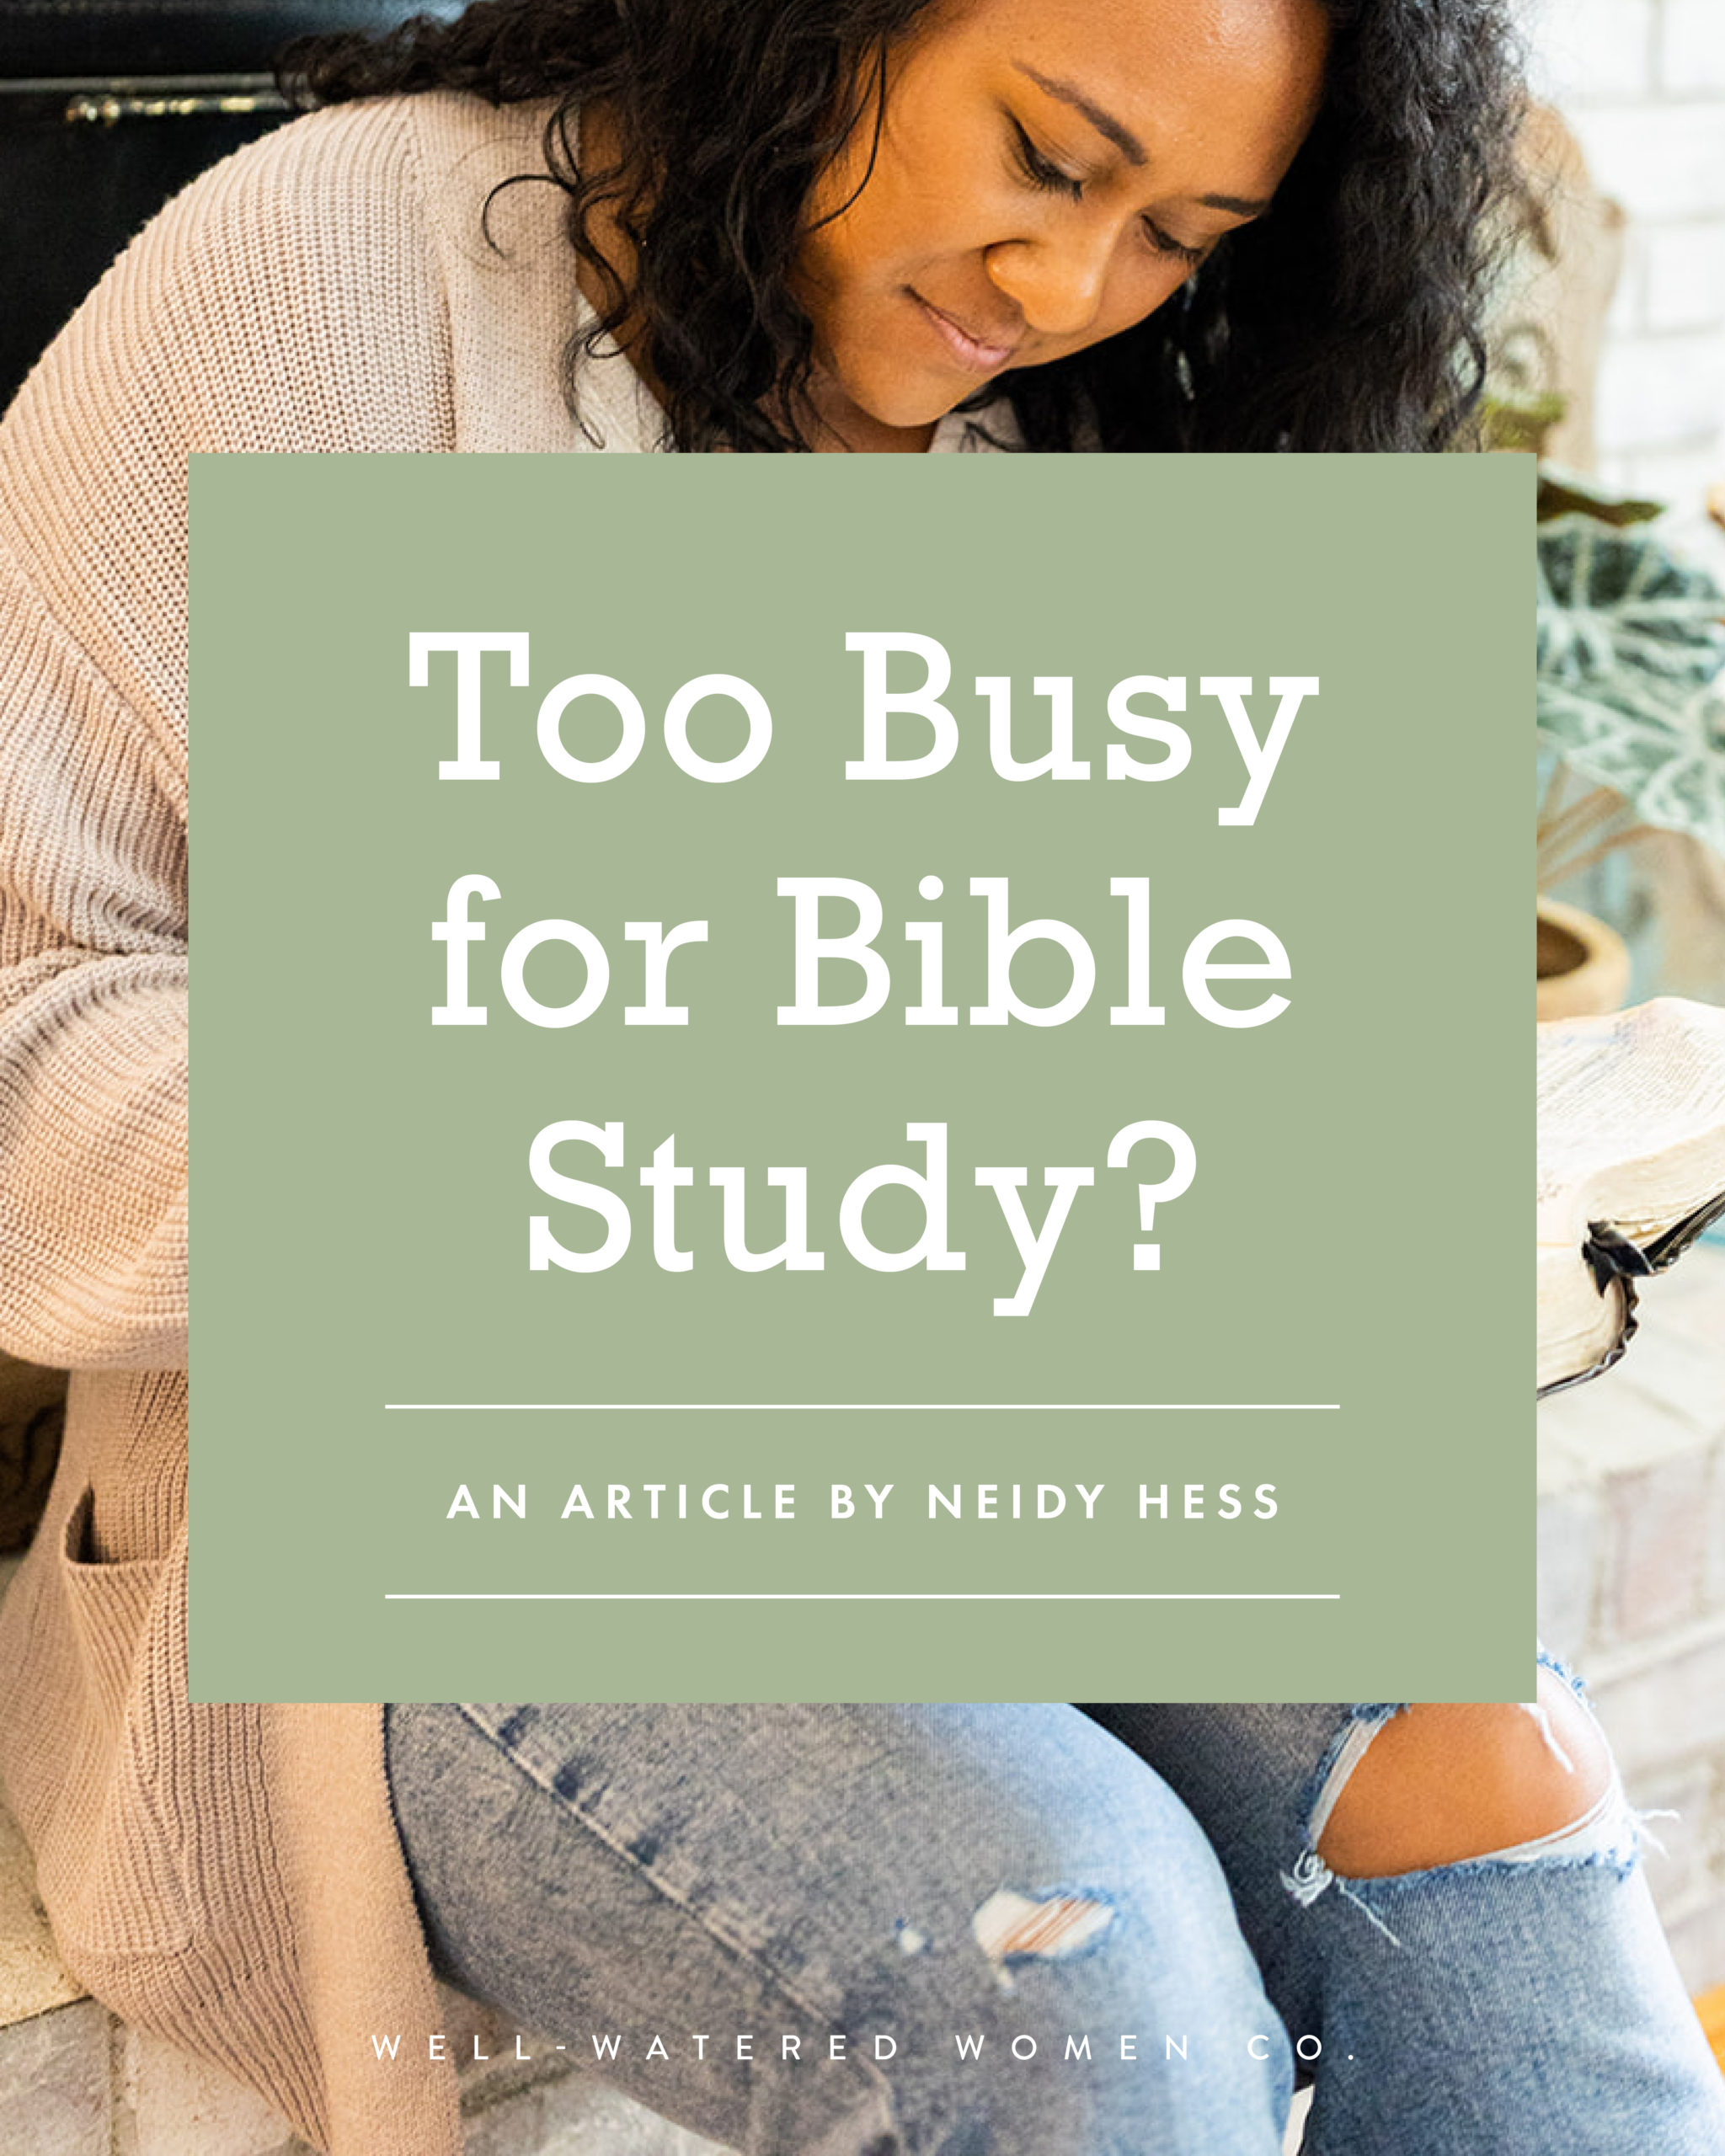 Too Busy for Bible Study? - an article from Well-Watered Women